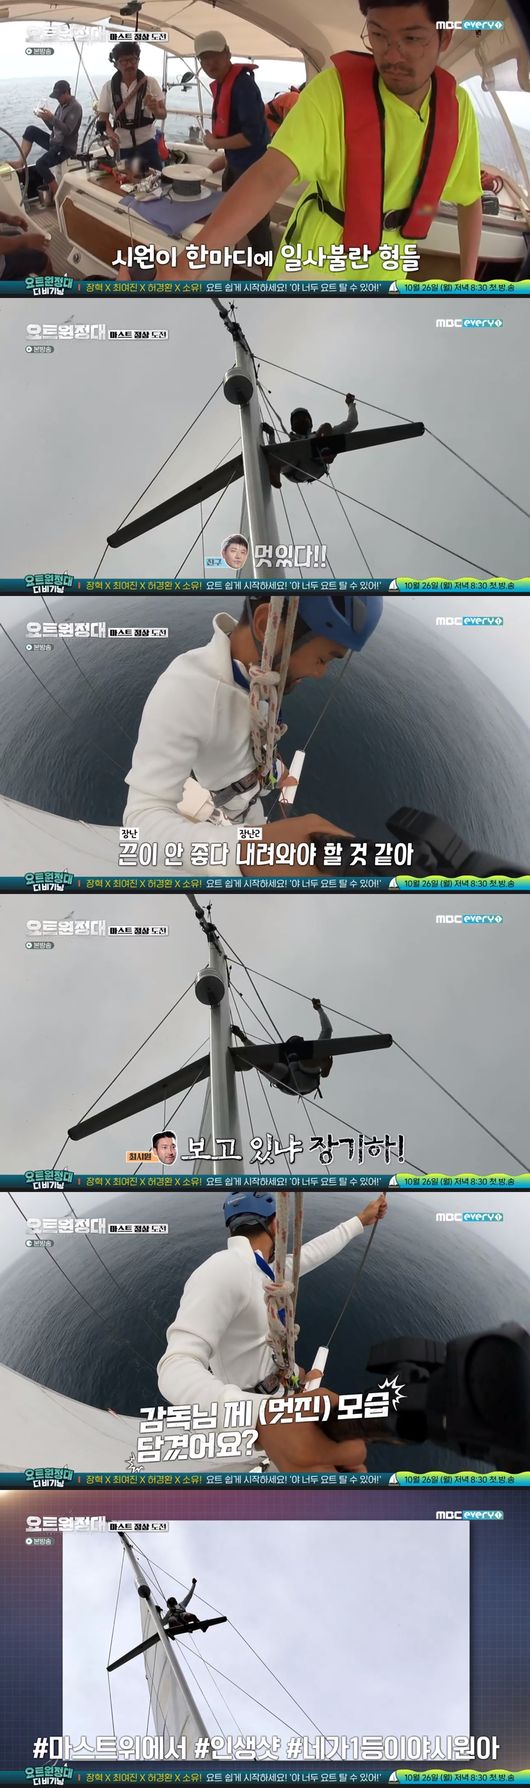 Jin Goo, Choi Siwon, Chang Kiha and Song Ho-joon climbed Mast as the last Top Model of the yacht trip.In MBC Everlon yacht Expedition broadcasted on the 19th, Jin Goo, Chang Kiha, Choi Siwon and Song Ho Joon climbed to Mast and recorded life shots.Captain Kim Seung-jin explained, I think the way to learn yacht is to hit the body. I will do Mast using climbing juma ring.First, Chang Kiha was the Top Model on the Mast climb.Chang Kiha said, I feel like jumping at the bungee. He slowly climbed up and was nervous and said, This is just a high-rise elevator.But Chang Kiha did not give up at the halfway point and climbed up to Mast.Jin Goo followed up with Top Model, who moved excitedly, unafraid, even in the high-rise Mast.Jin Goo said, I heard that it is a necessary course for yacht people to go up to Mast and take pictures.But I thought I would not want you to do it, he said. I did not have the fear of getting close to Yacht or getting close to the sea. Song Ho-joon decided to go up to the top model alone without the help of other members, and Song Ho-joon started to take a step up, taking advantage of his experience of jumaring in the past climbing.Choi Siwon then went on to climb Mast, too; Choi Siwon looked at the camera and laughed, shouting, Was you watching or Chang Kiha! You stimulated me?Choi Siwon said: I thought I only needed to go up the first floor.But Chang Kiha came up and said that he did it all. Jin Goo also went to the second floor and I once again Top Model.The crew gave Choi Siwon a laugh by scaring him Im not good with strings.But Choi Siwon once again shouted Watch or Chang Kiha and made the surroundings into a laughing sea.Choi Siwon then shouted, Is it as cool as the Jin Goo type? The crew laughed, saying, You are the first.Choi Siwon recorded life shots on top of Mast: MBC Everlon yacht Expedition broadcast capture